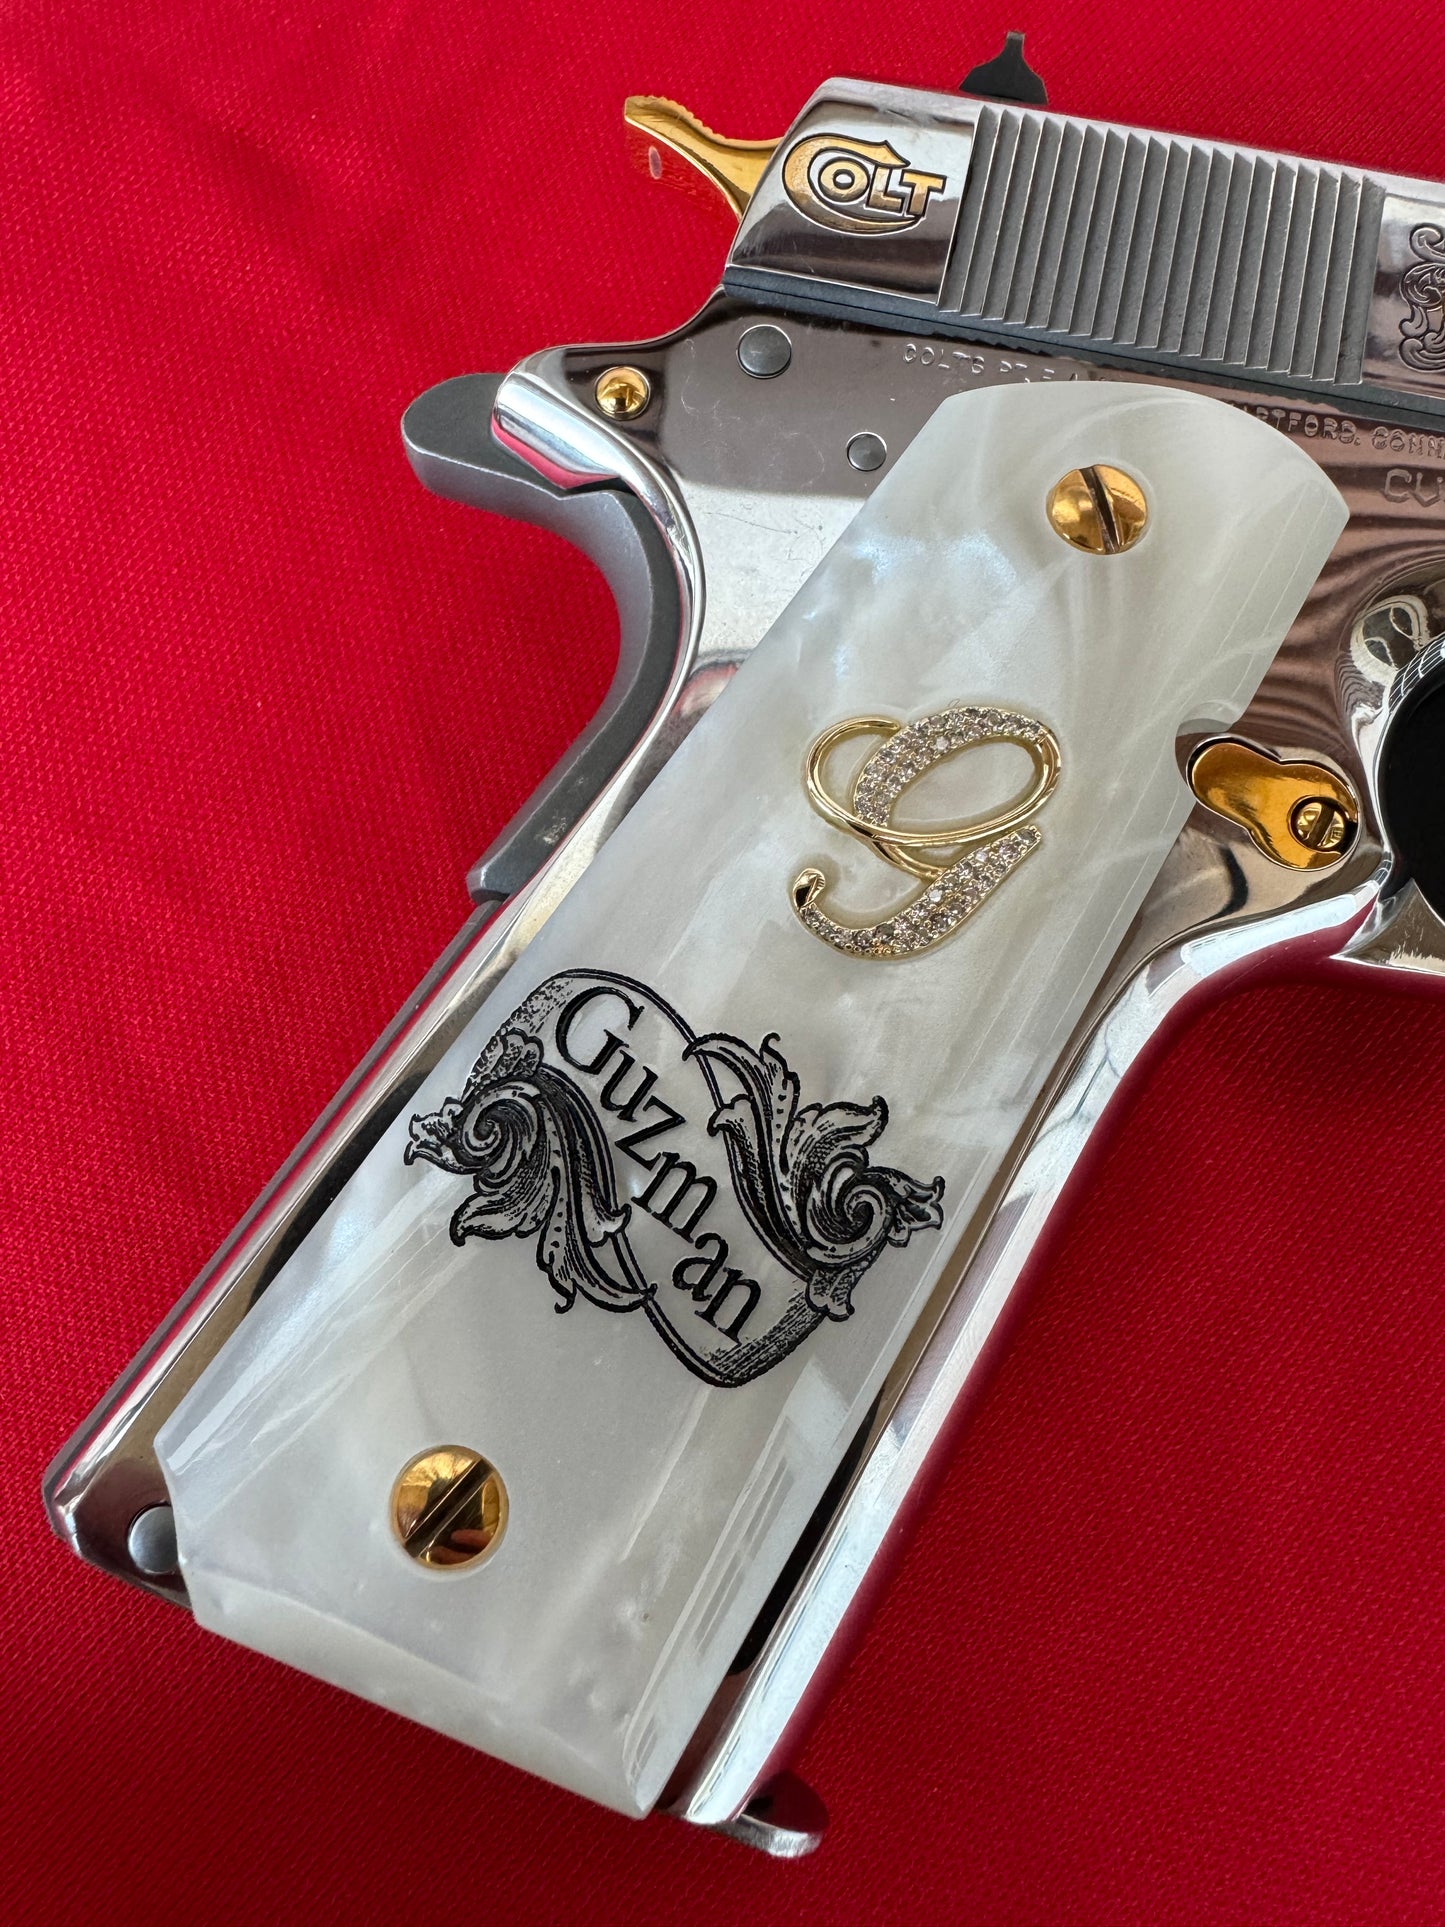 1911 “G” Last Name “Guzman” 24k Gold Plated Inlayed CZ stones Grips  White Pearl Grips